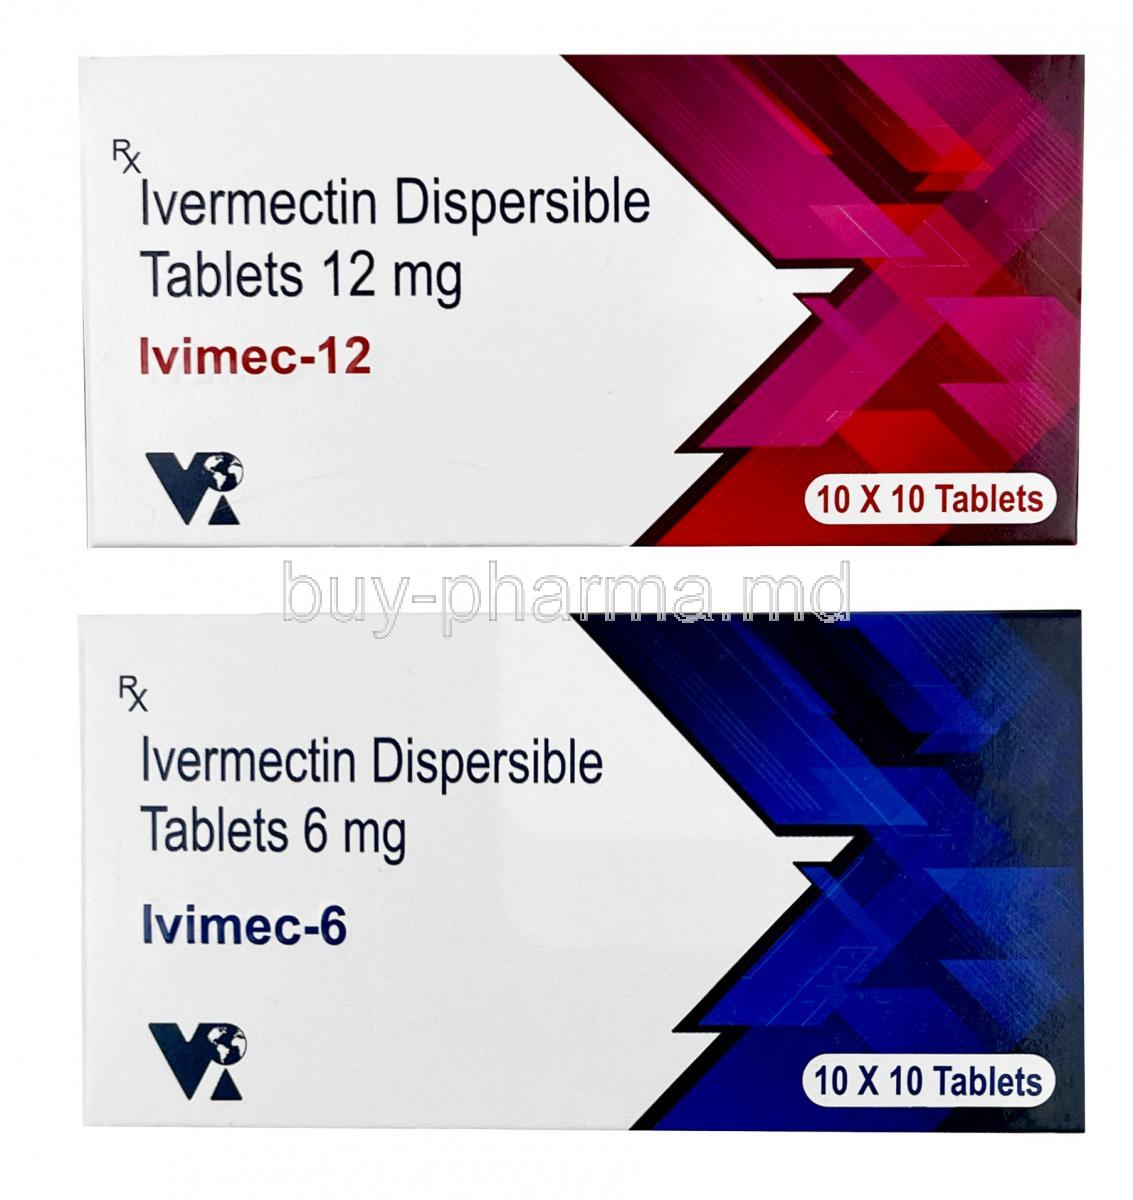 Ivimec 6mg and 12mg, VEA Impex, Box front view